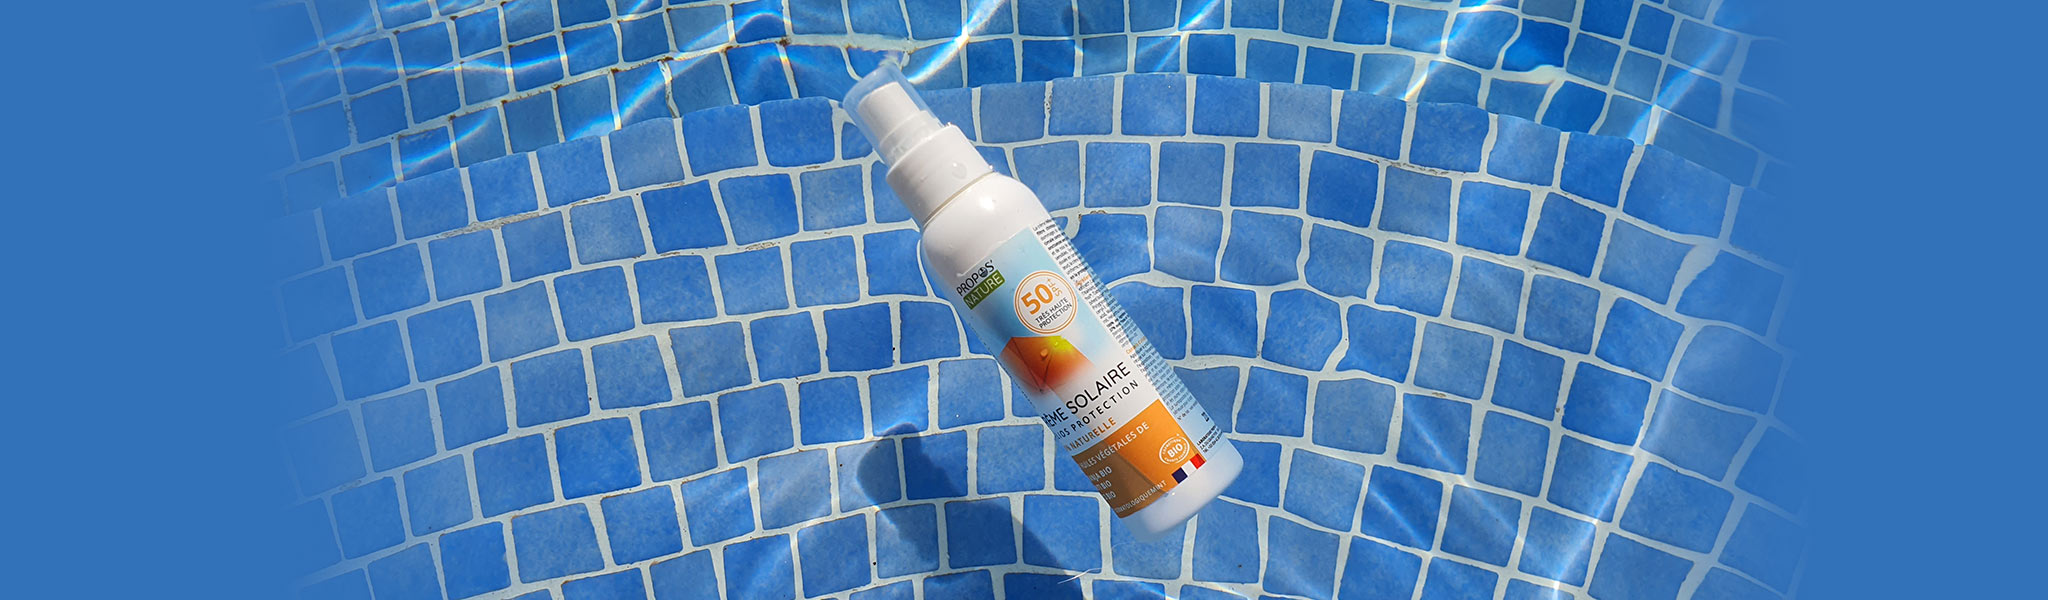 A bottle of Propos Nature Sunscreen floating in the pool